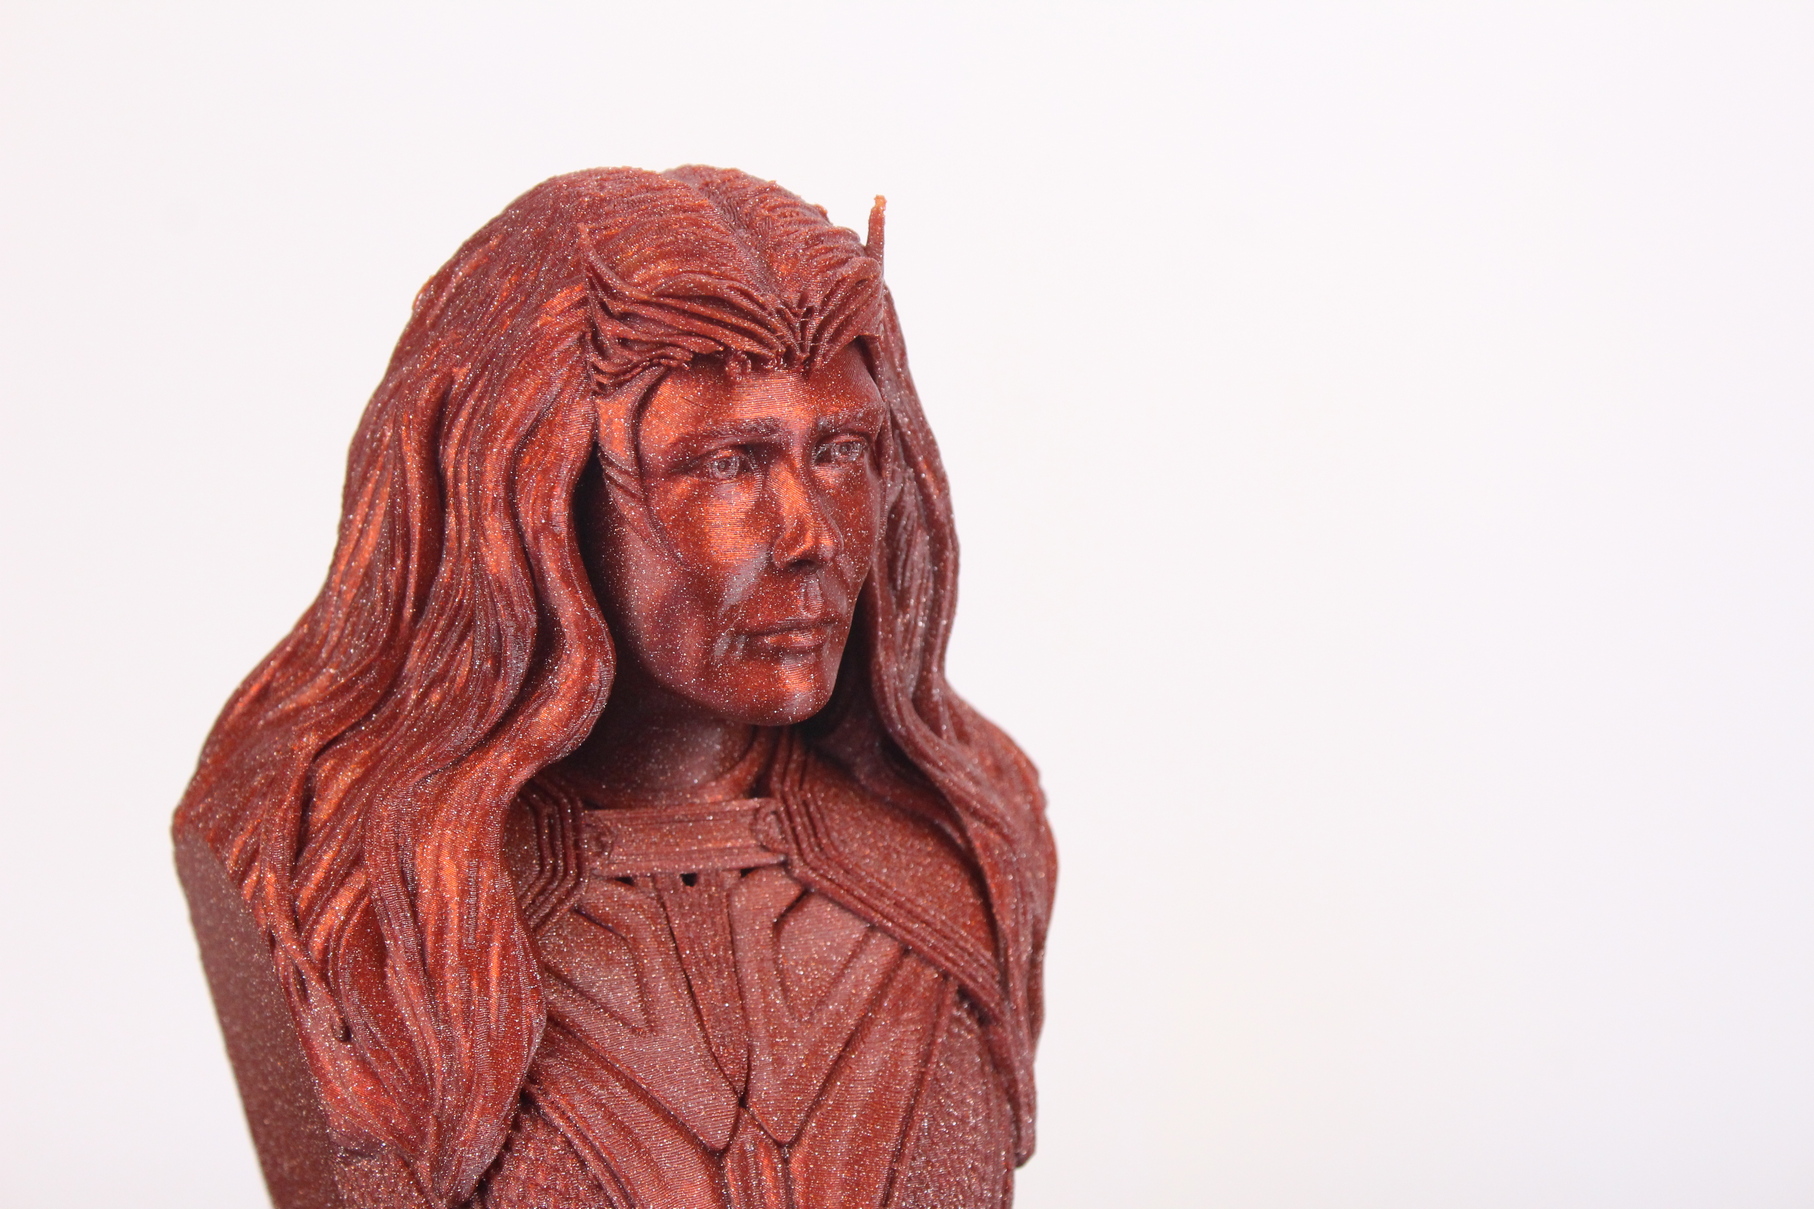 Scarlet Witch printed on the Voxelab Aries 7 | Voxelab Aries Review: A Worthy Upgrade for the Aquila?